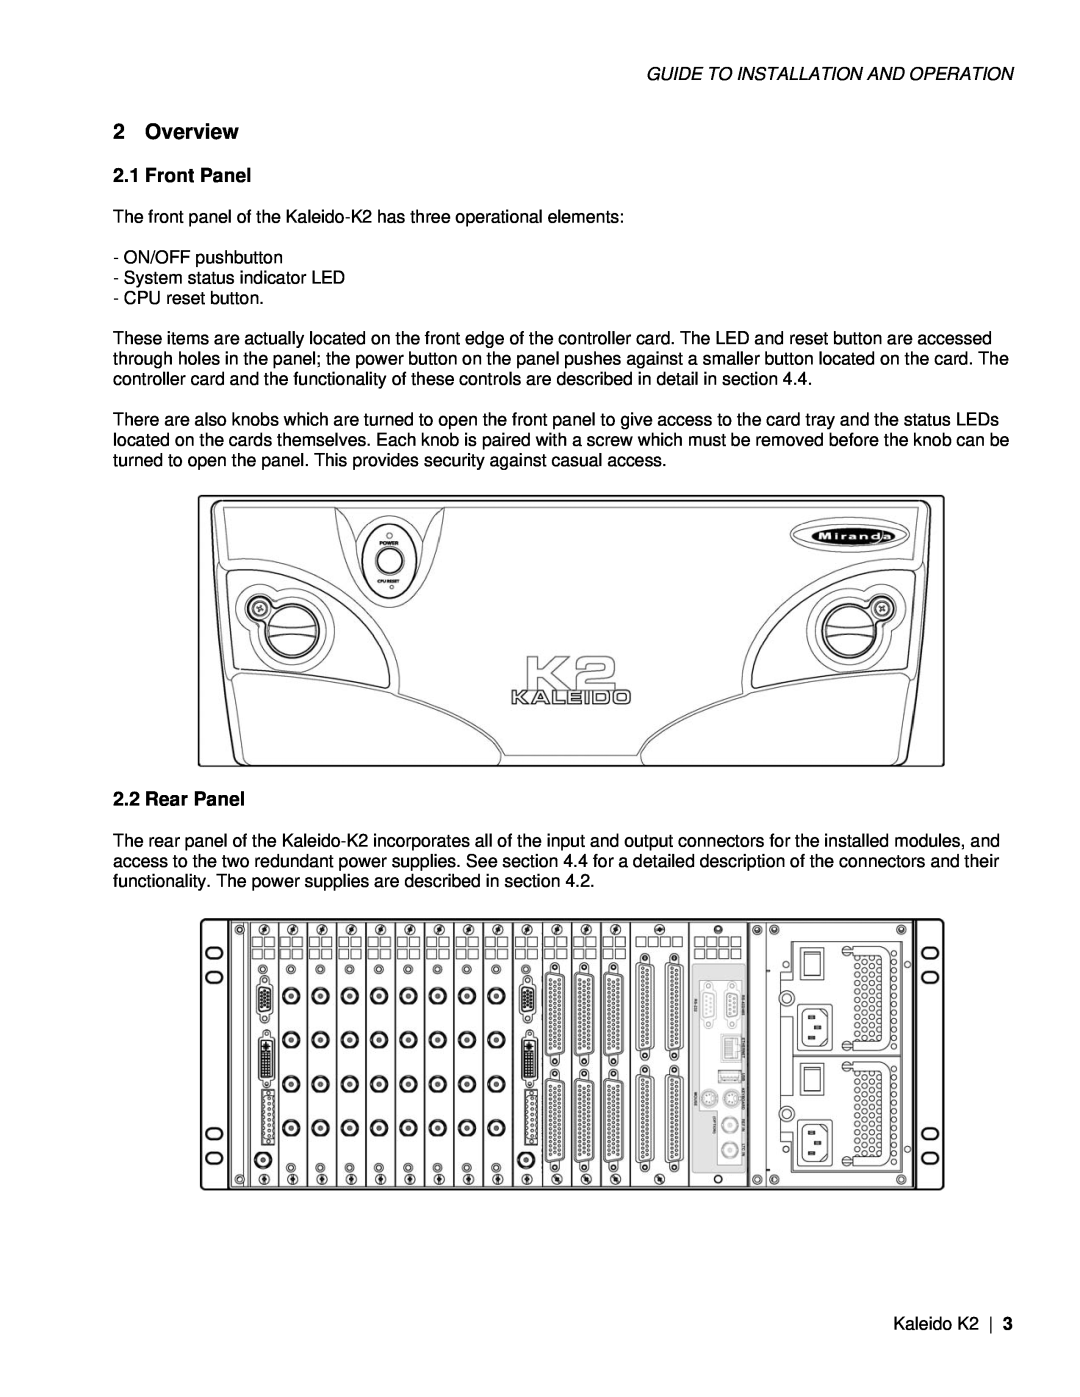 Miranda Camera Co KALEIDO-K2, M406-9900-402 specifications Overview, Front Panel, Rear Panel 